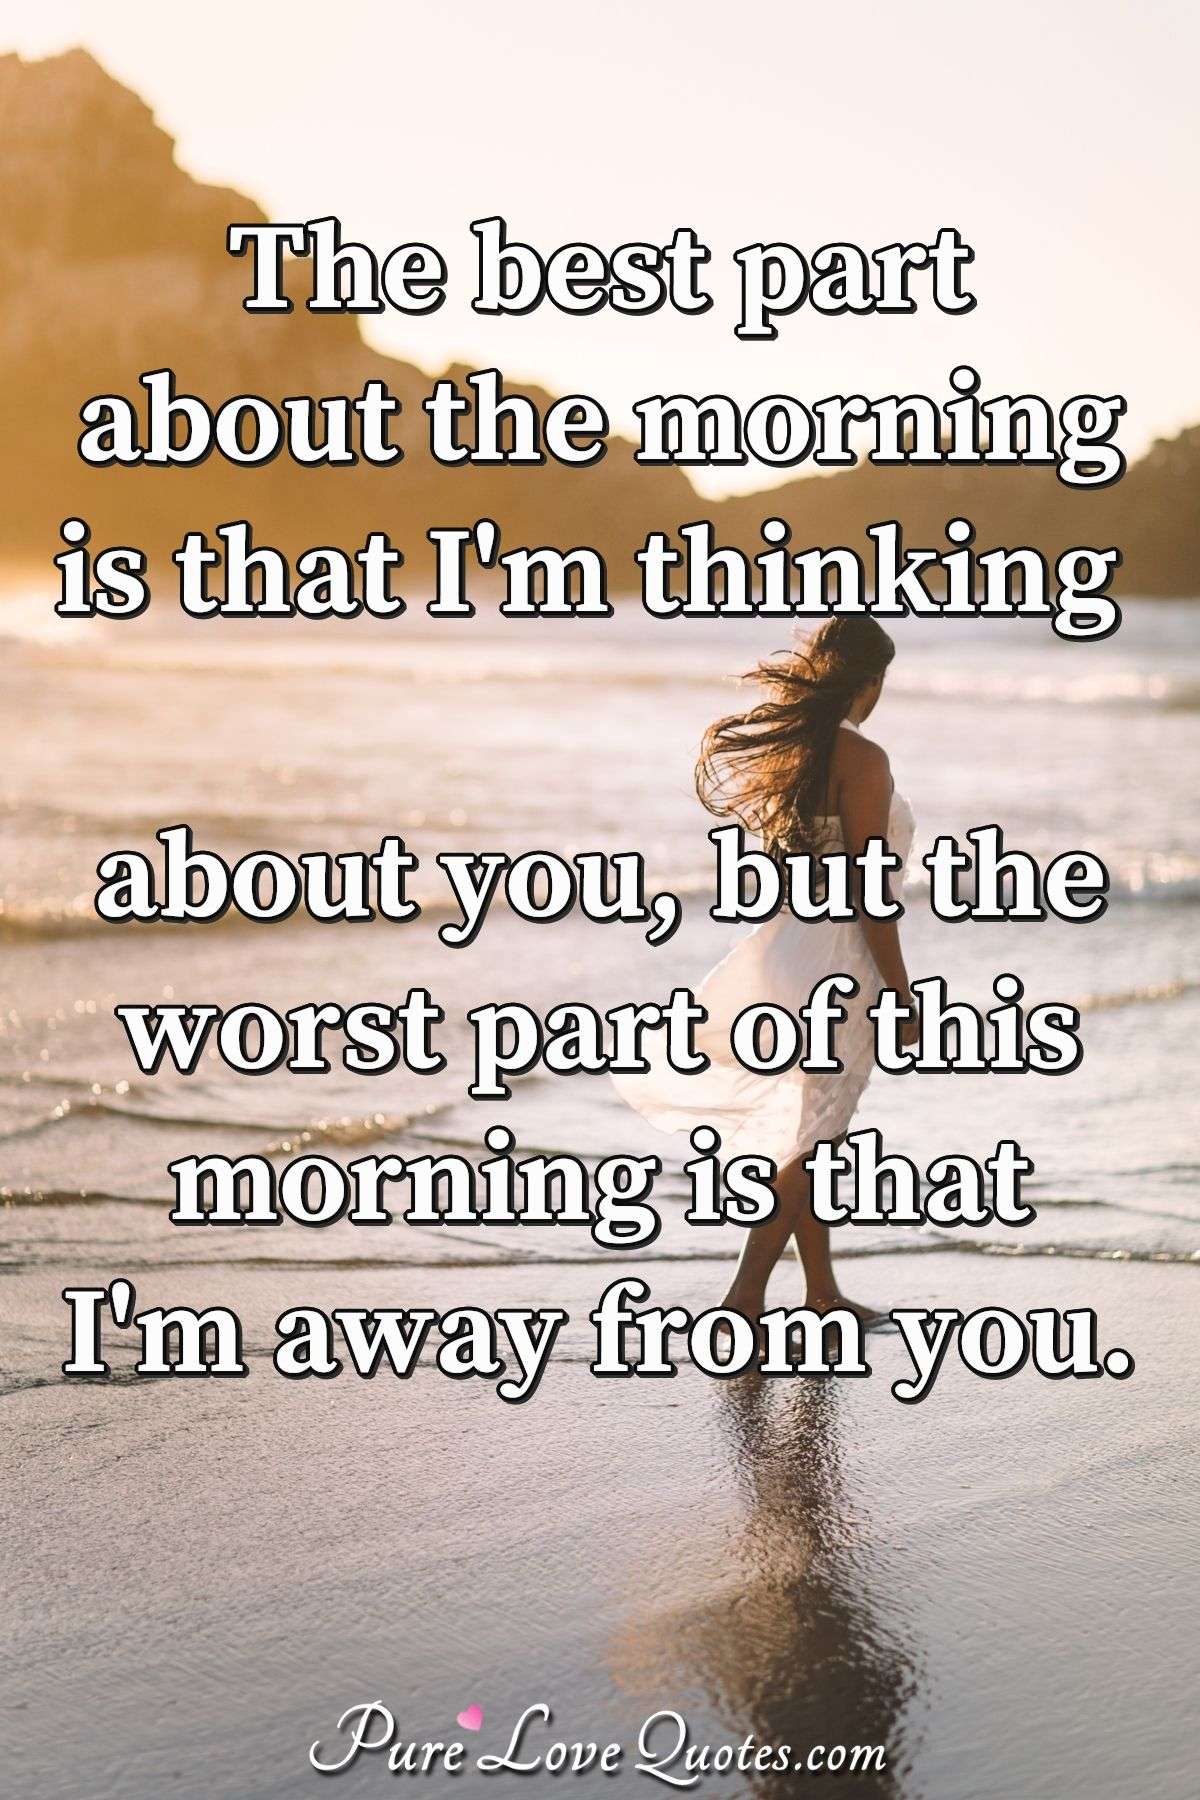 The best part about the morning is that I'm thinking about you, but the worst part of this morning is that I'm away from you. - Anonymous